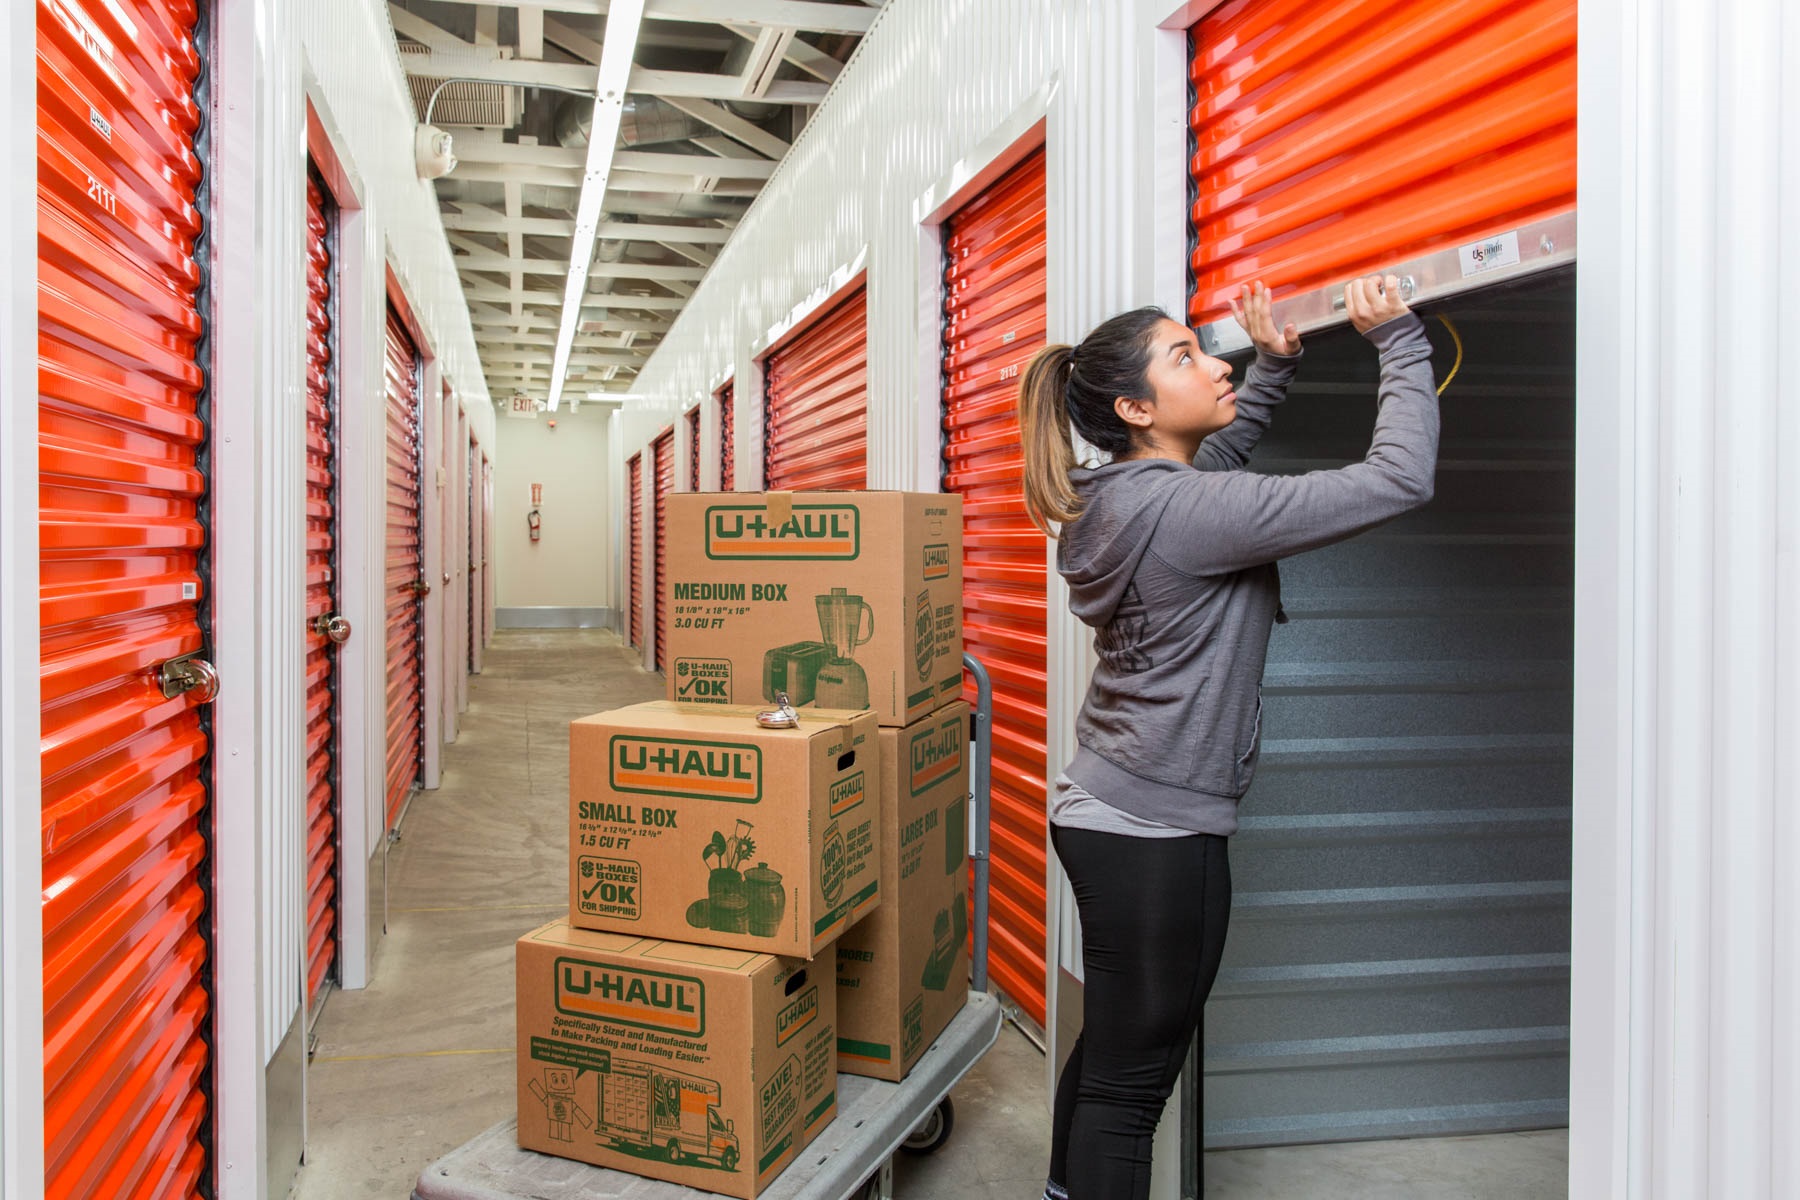 U-Haul Company of Mississippi is offering 30 days of free self-storage and U-Box container usage to residents who stand to be impacted by heavy rains and flooding associated with Subtropical Storm Alberto.